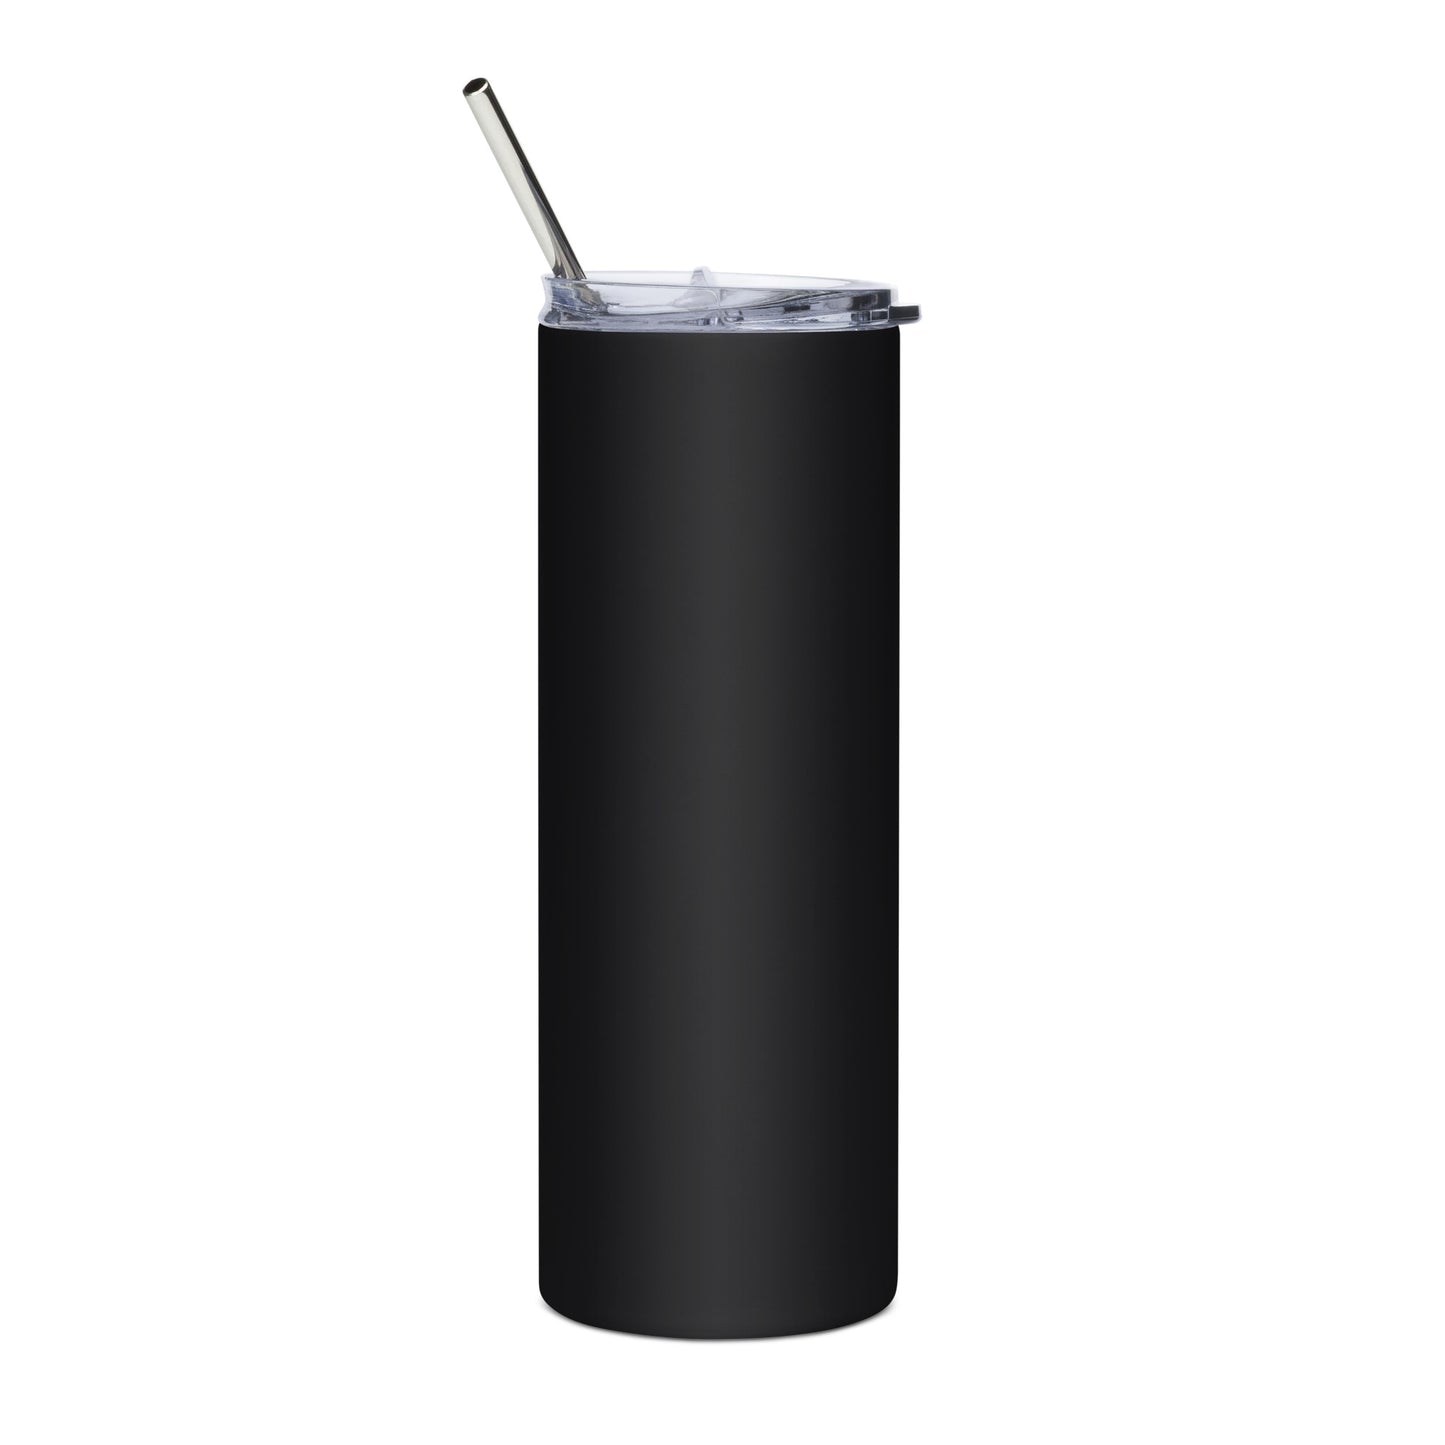 Self Care Stainless steel tumbler